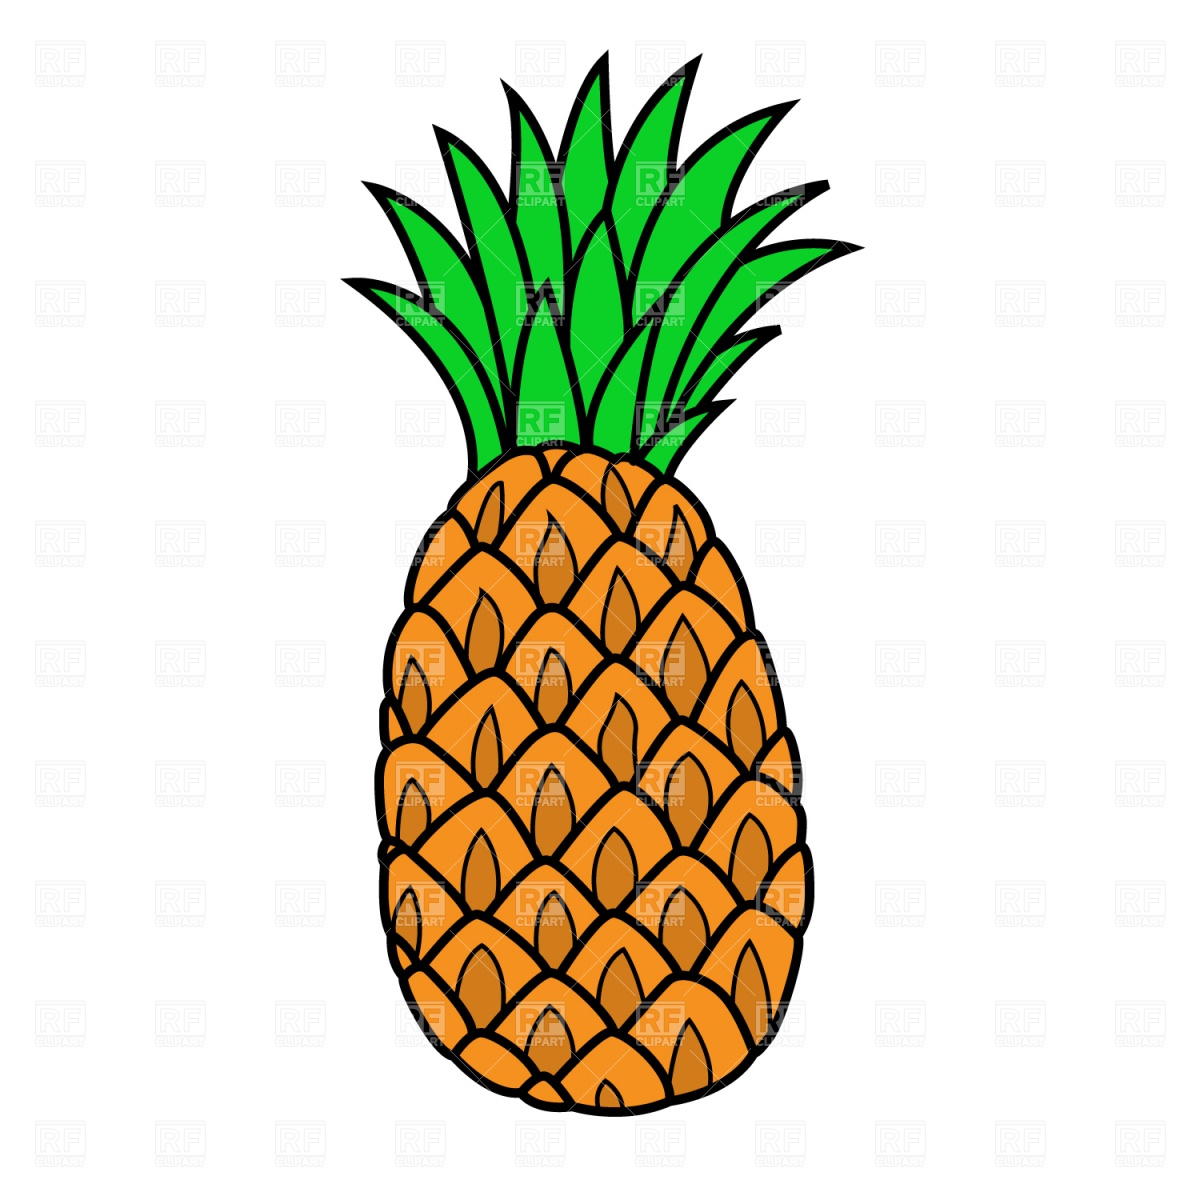 Pineapple Download Royalty Free Vector Clipart  Eps 